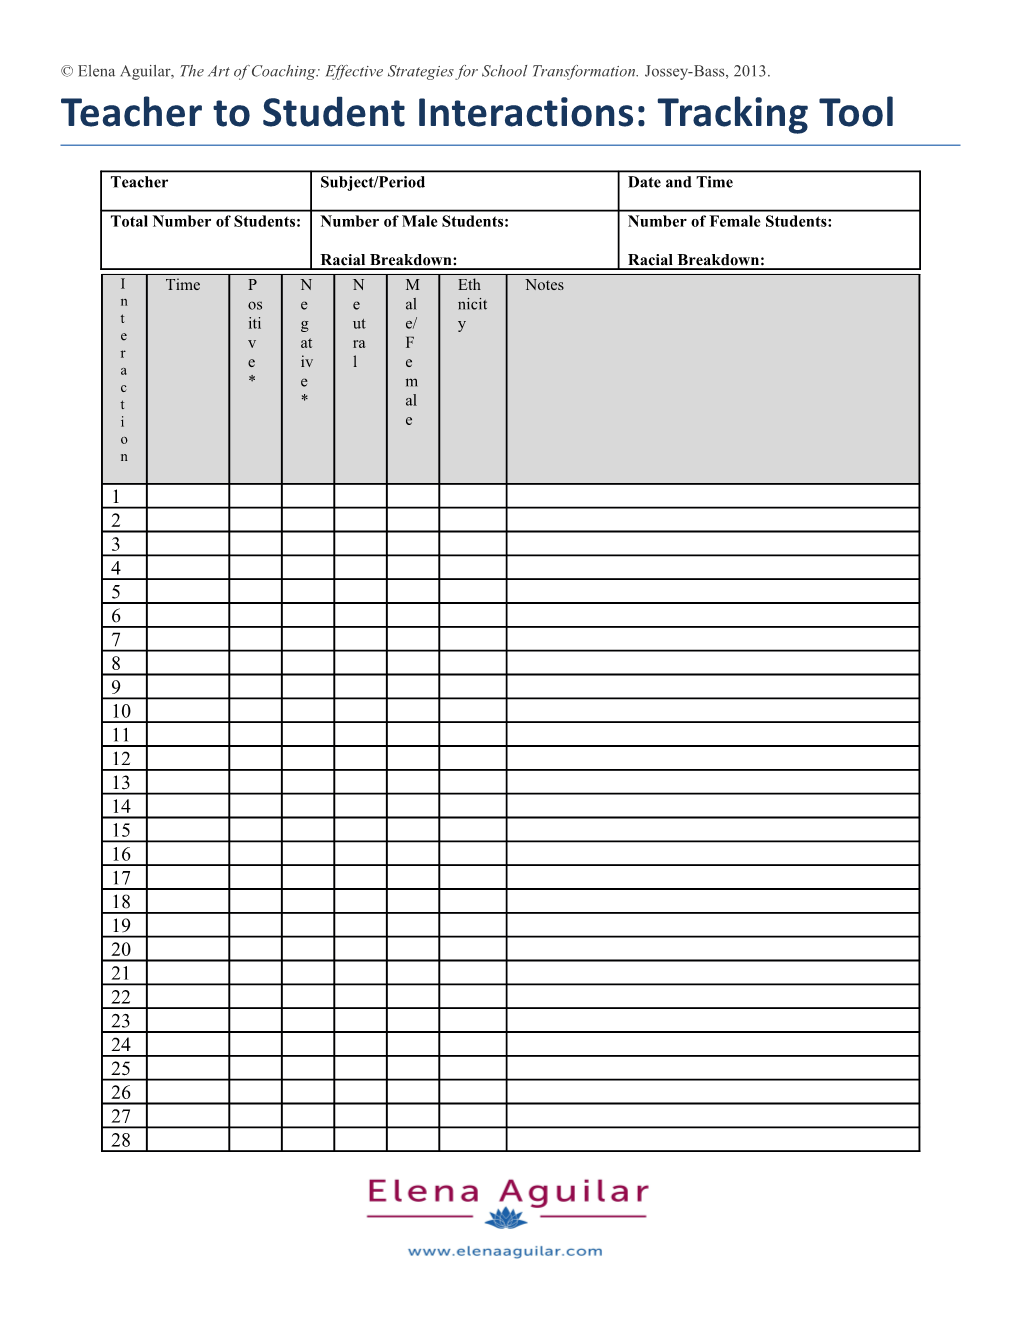 Teacher to Student Interactions: Tracking Tool